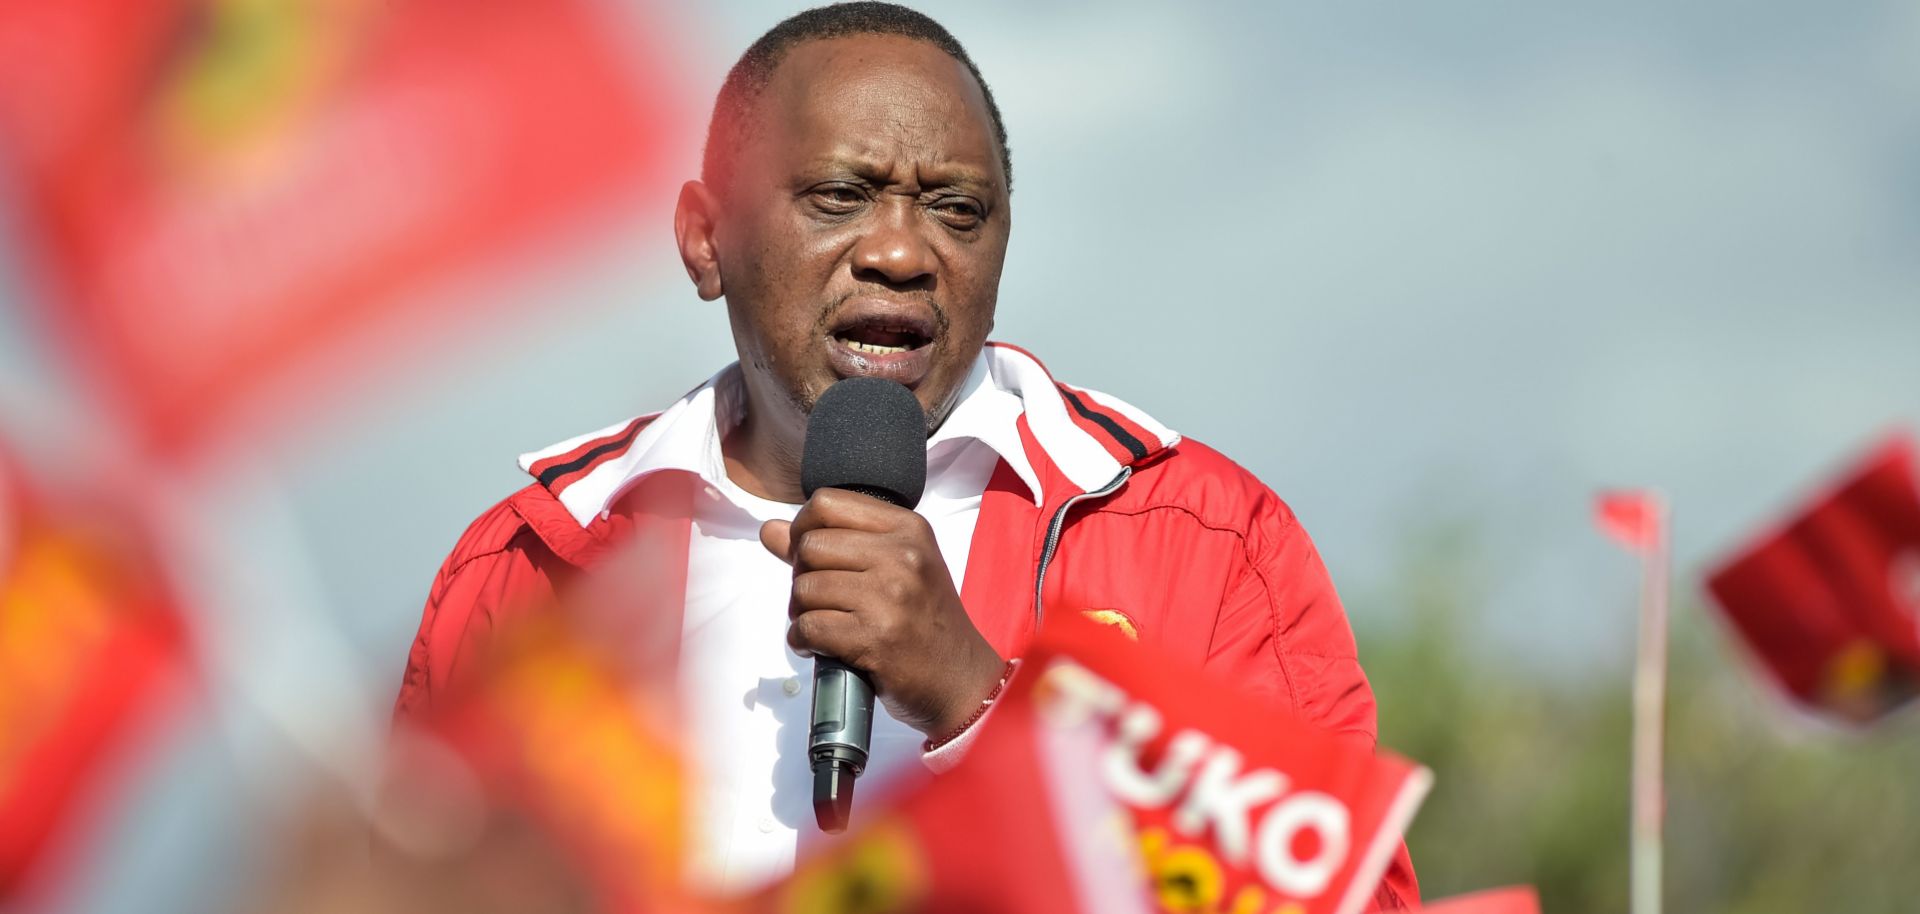 President Uhuru Kenyatta appears headed for re-election after the main opposition leader pulled out of the race.